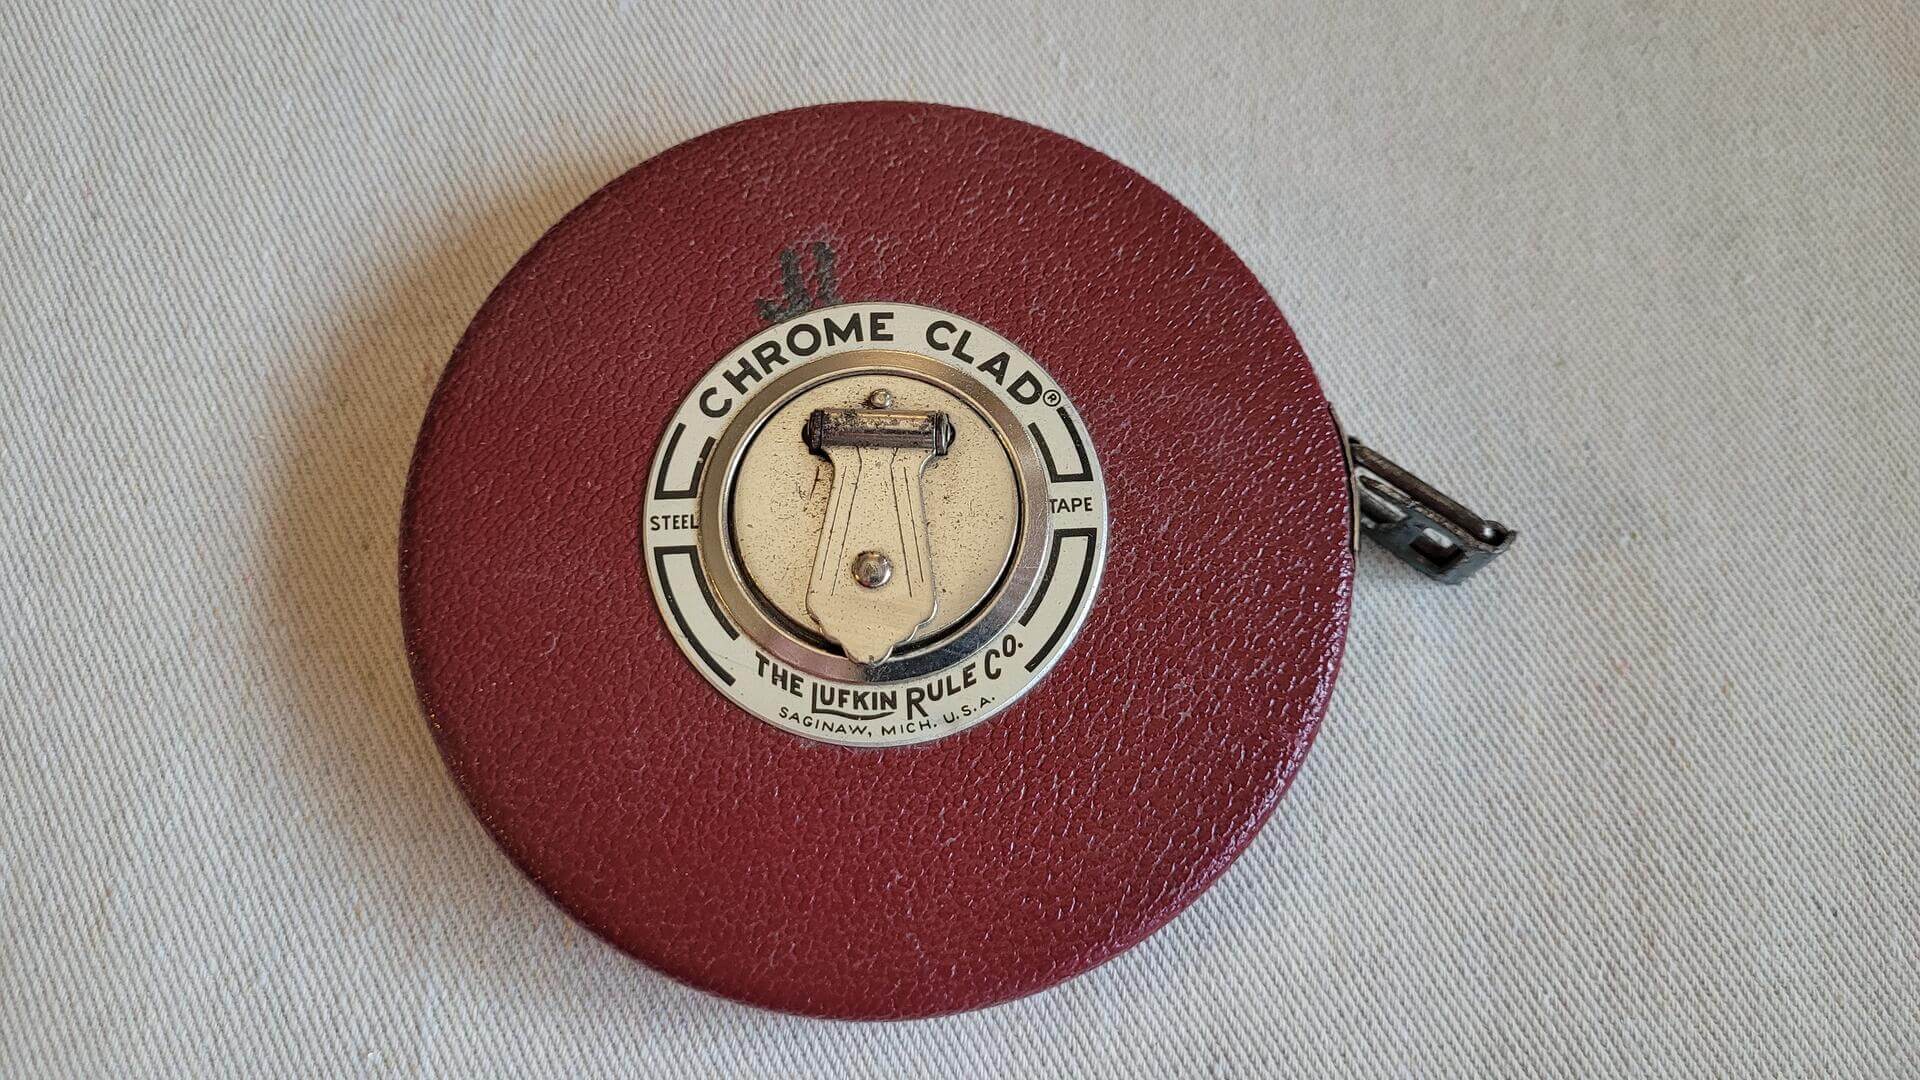 Vintage Lufkin Rule Co. 100' crome clad steel tape measure with Saginaw MI red leather case and Barrie ON chrome tape manufactured for Canadian market. Antique made in both USA and Canada collectible marking and measuring tool.